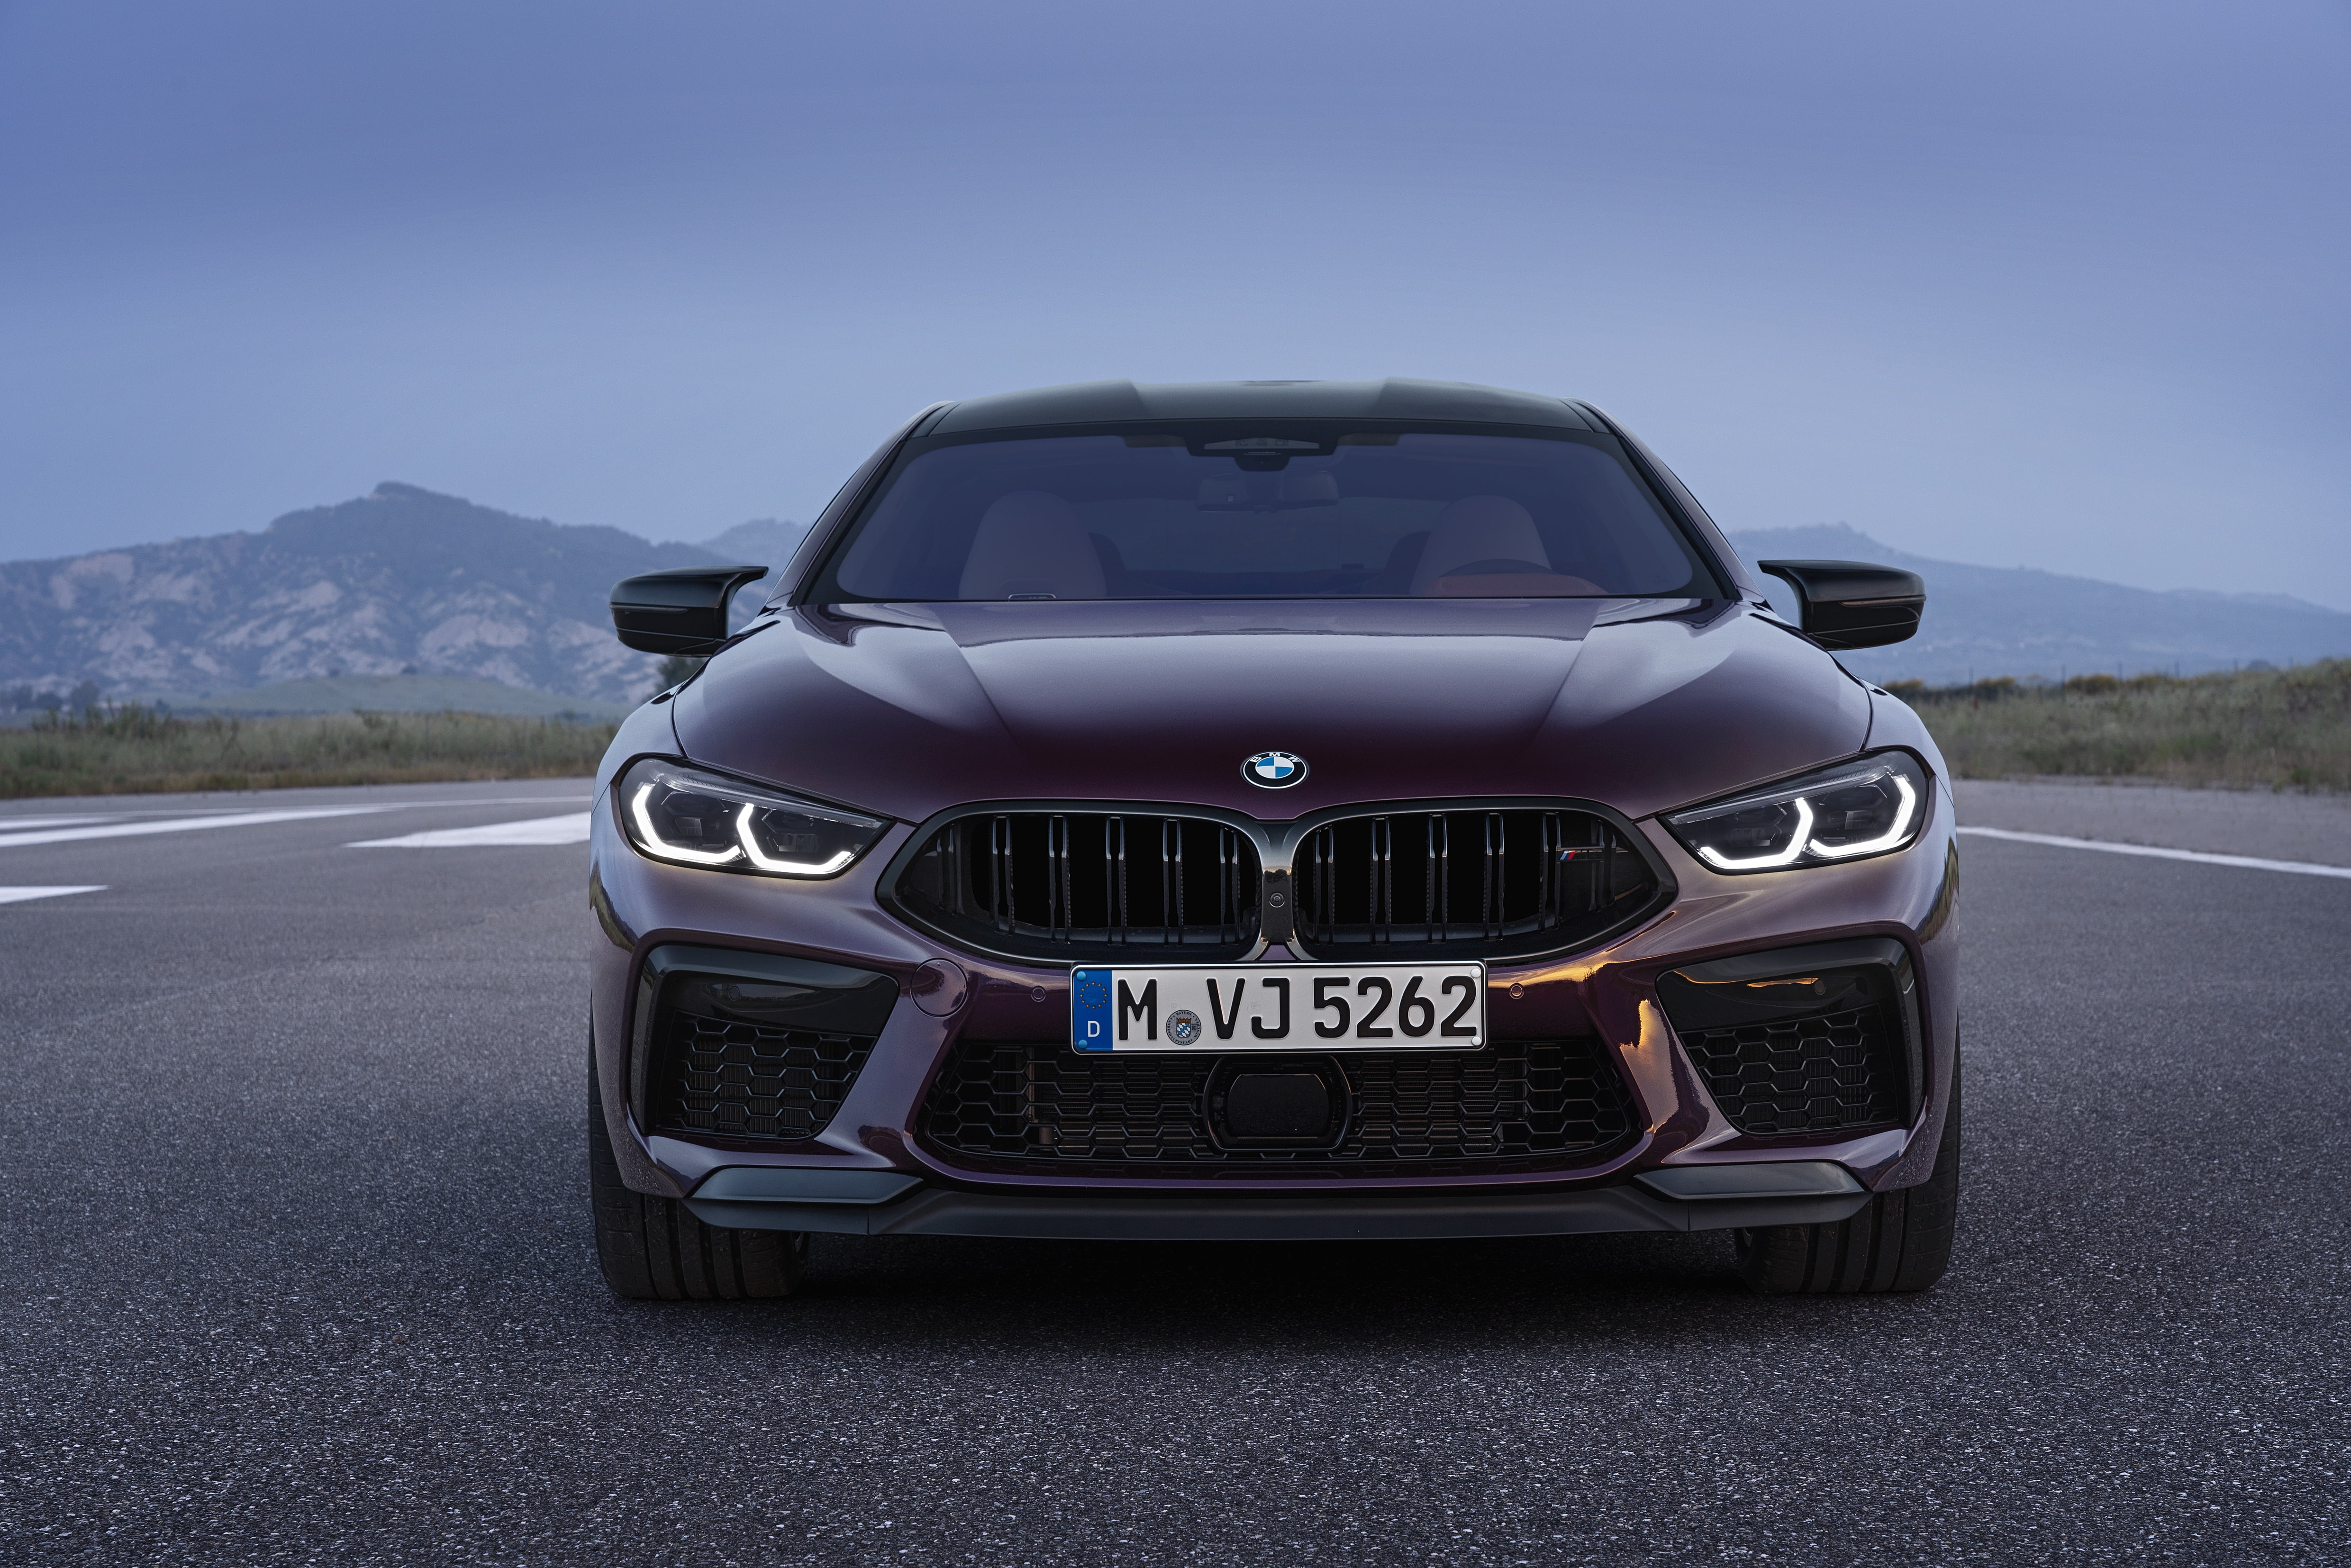 coupe, BMW, front view, 2019, M8, the four-door, M8 Gran Coupe